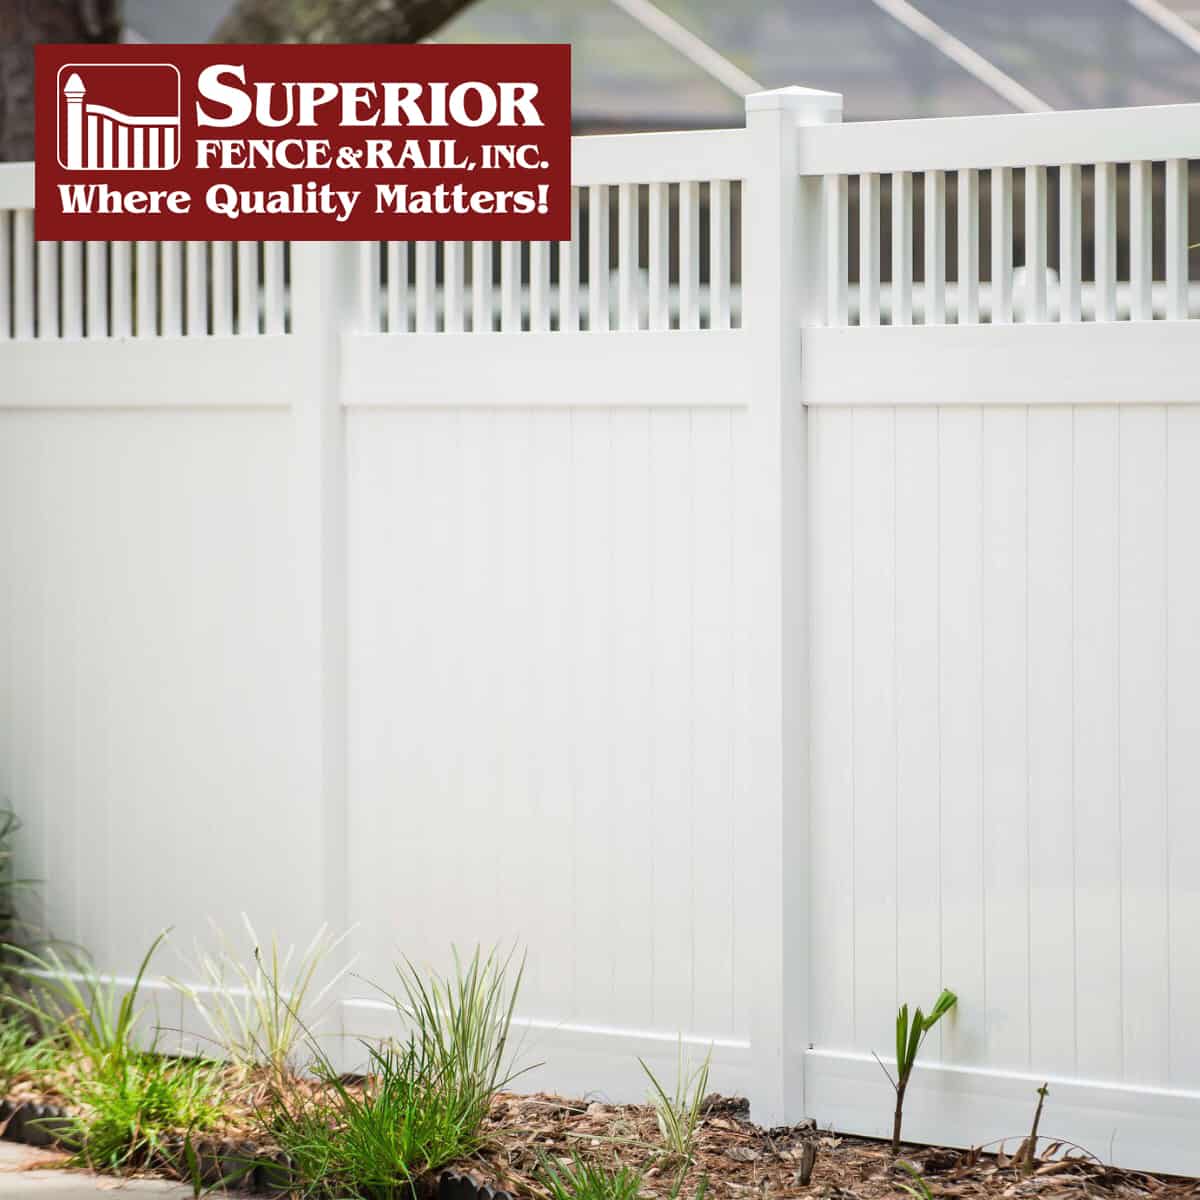 Saint Peters Fence Company Contractor